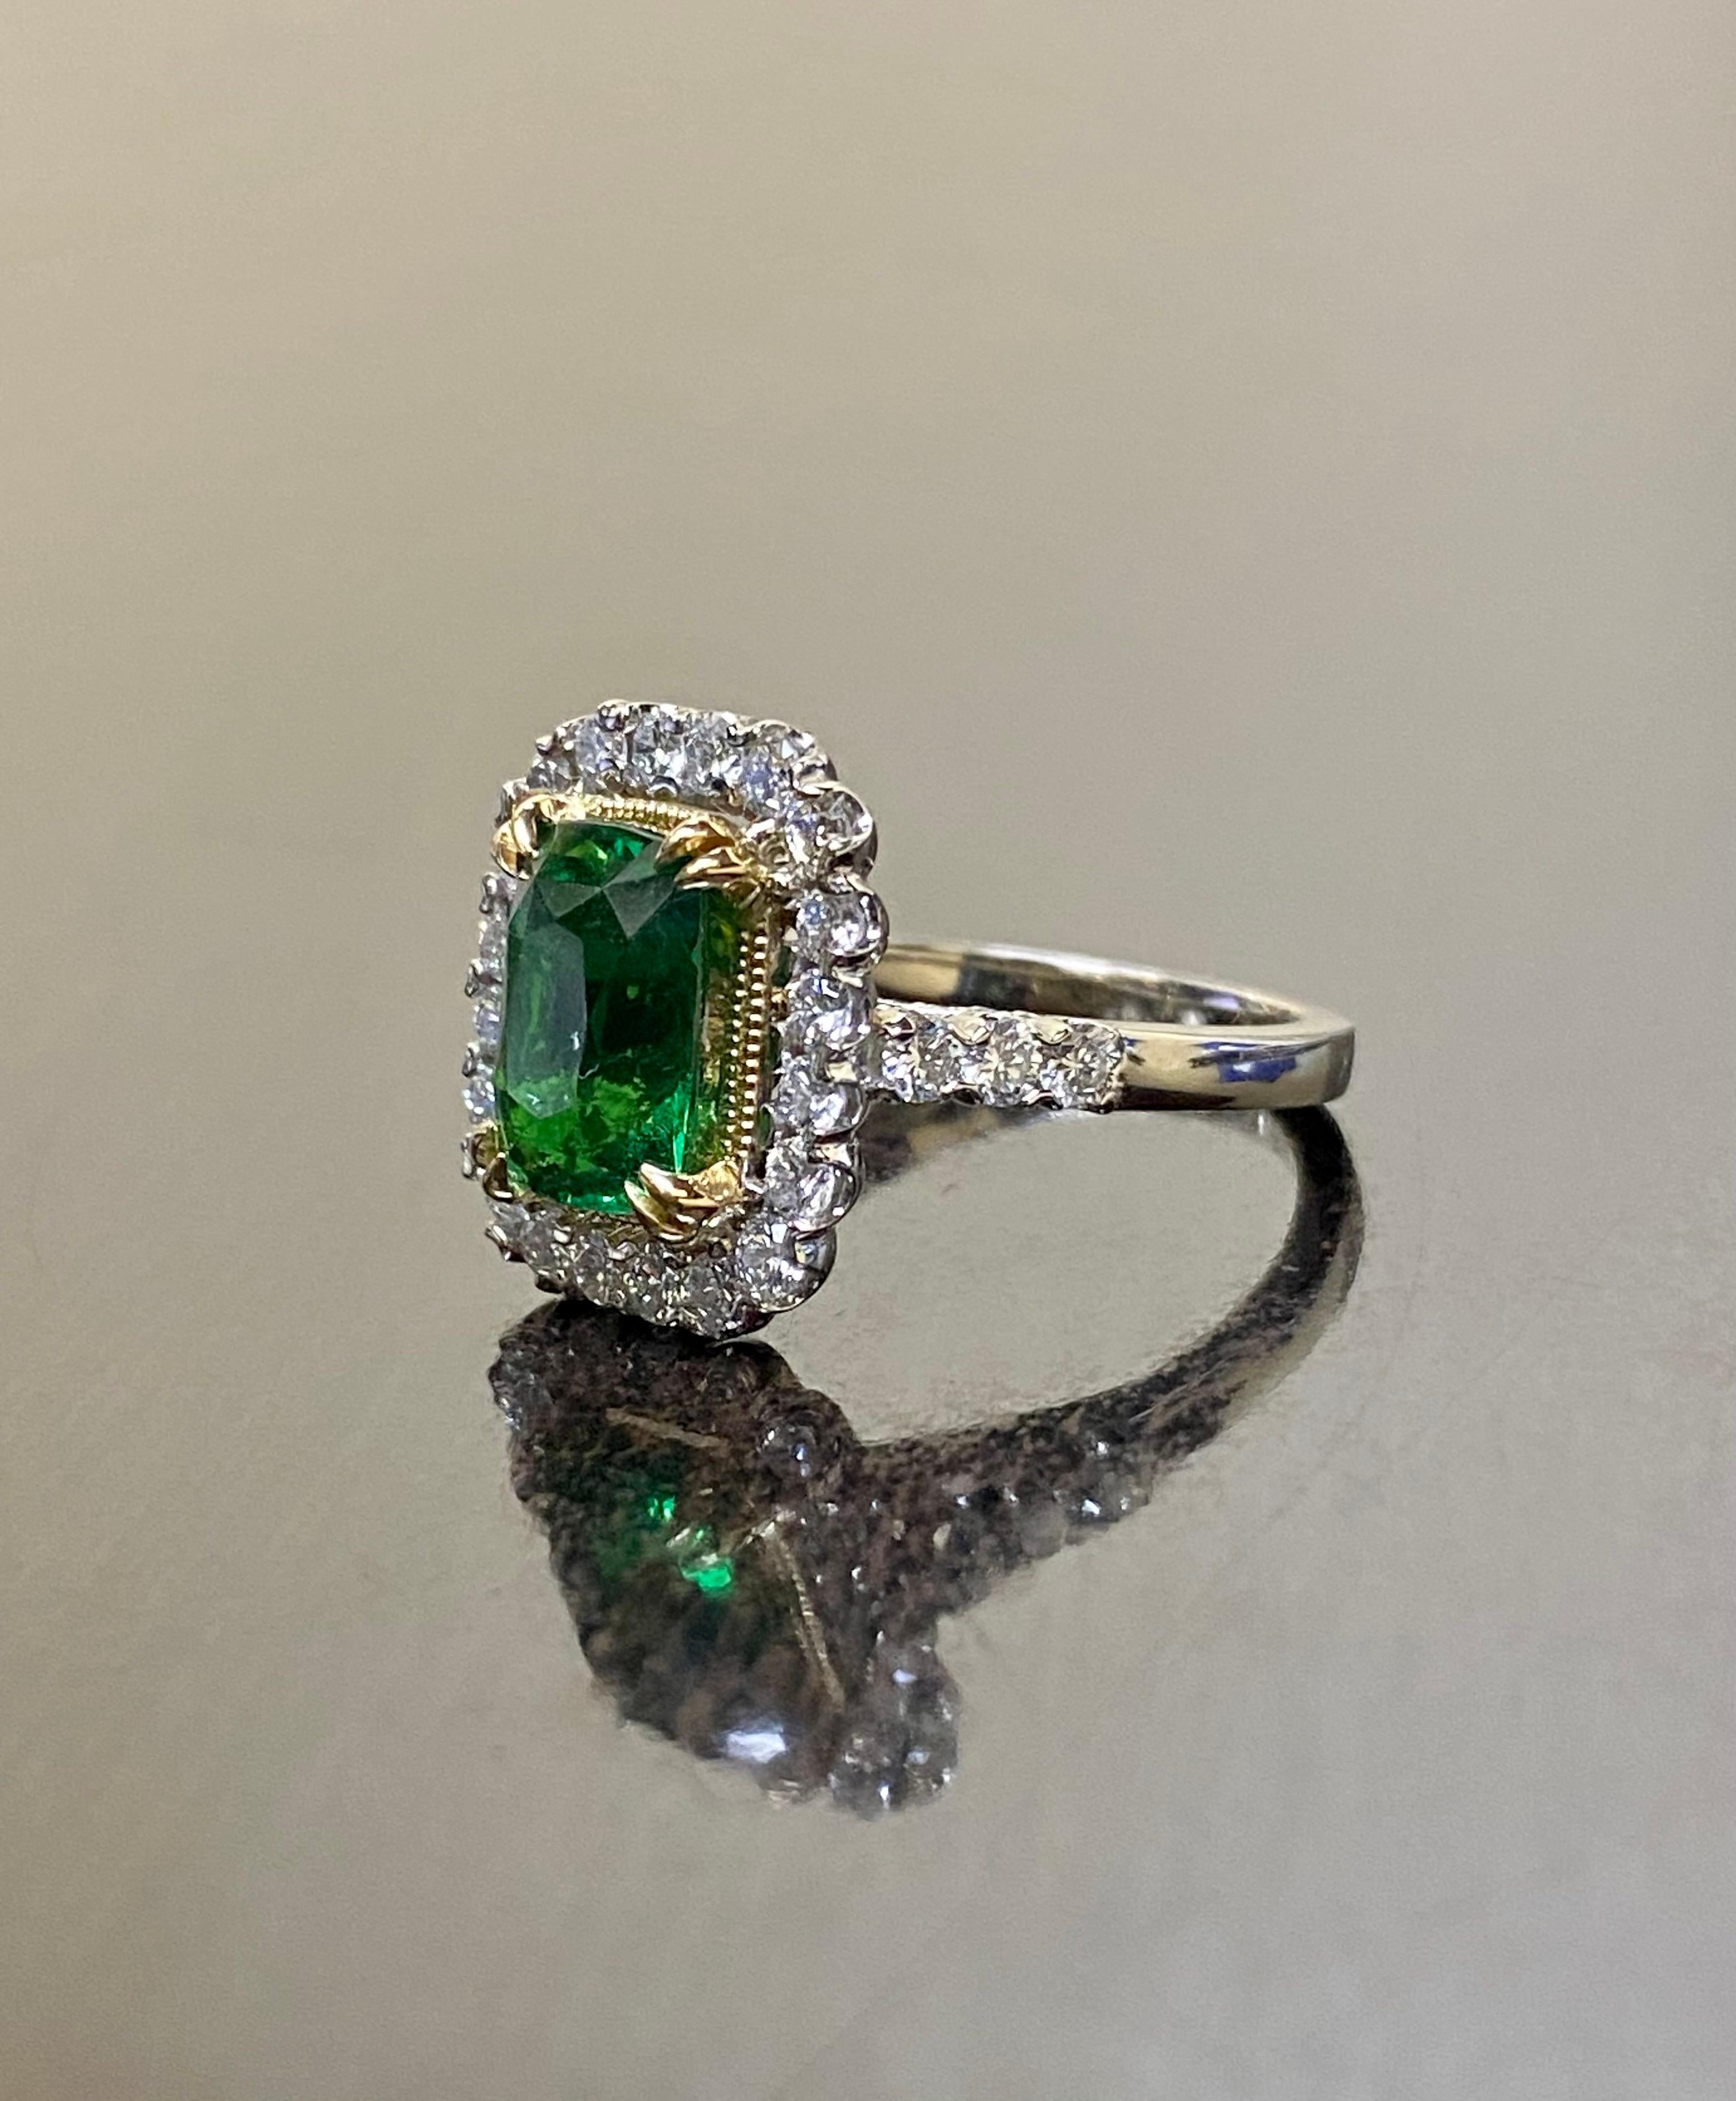 18K White Gold Halo Diamond GIA Certified 3.13 Carat Tsavorite Garnet Ring In New Condition For Sale In Los Angeles, CA